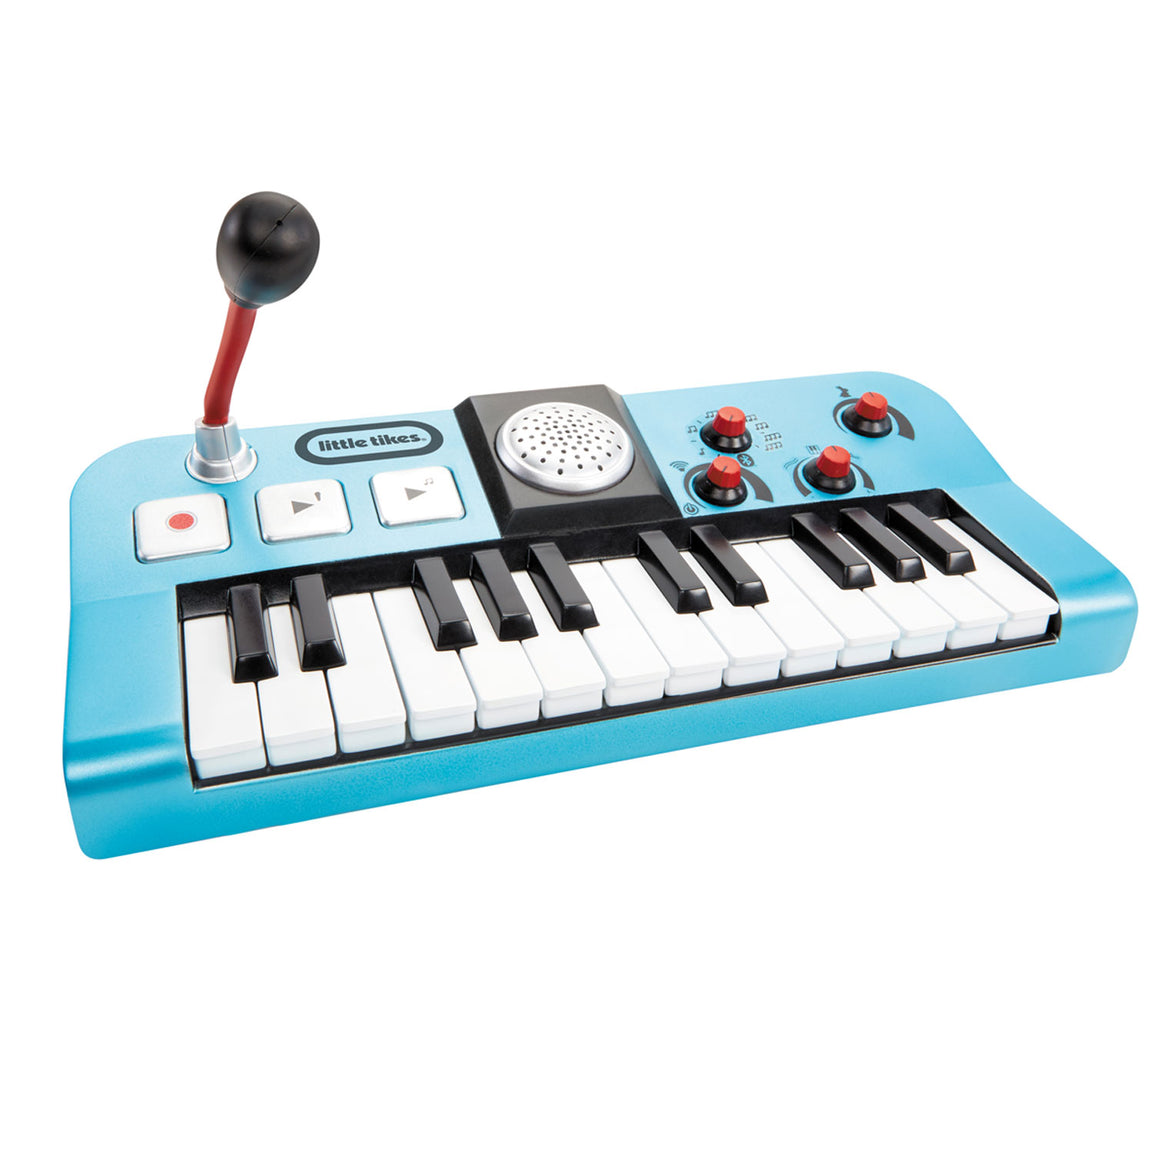 My Real Jam™ Keyboard - Official Little Tikes Website